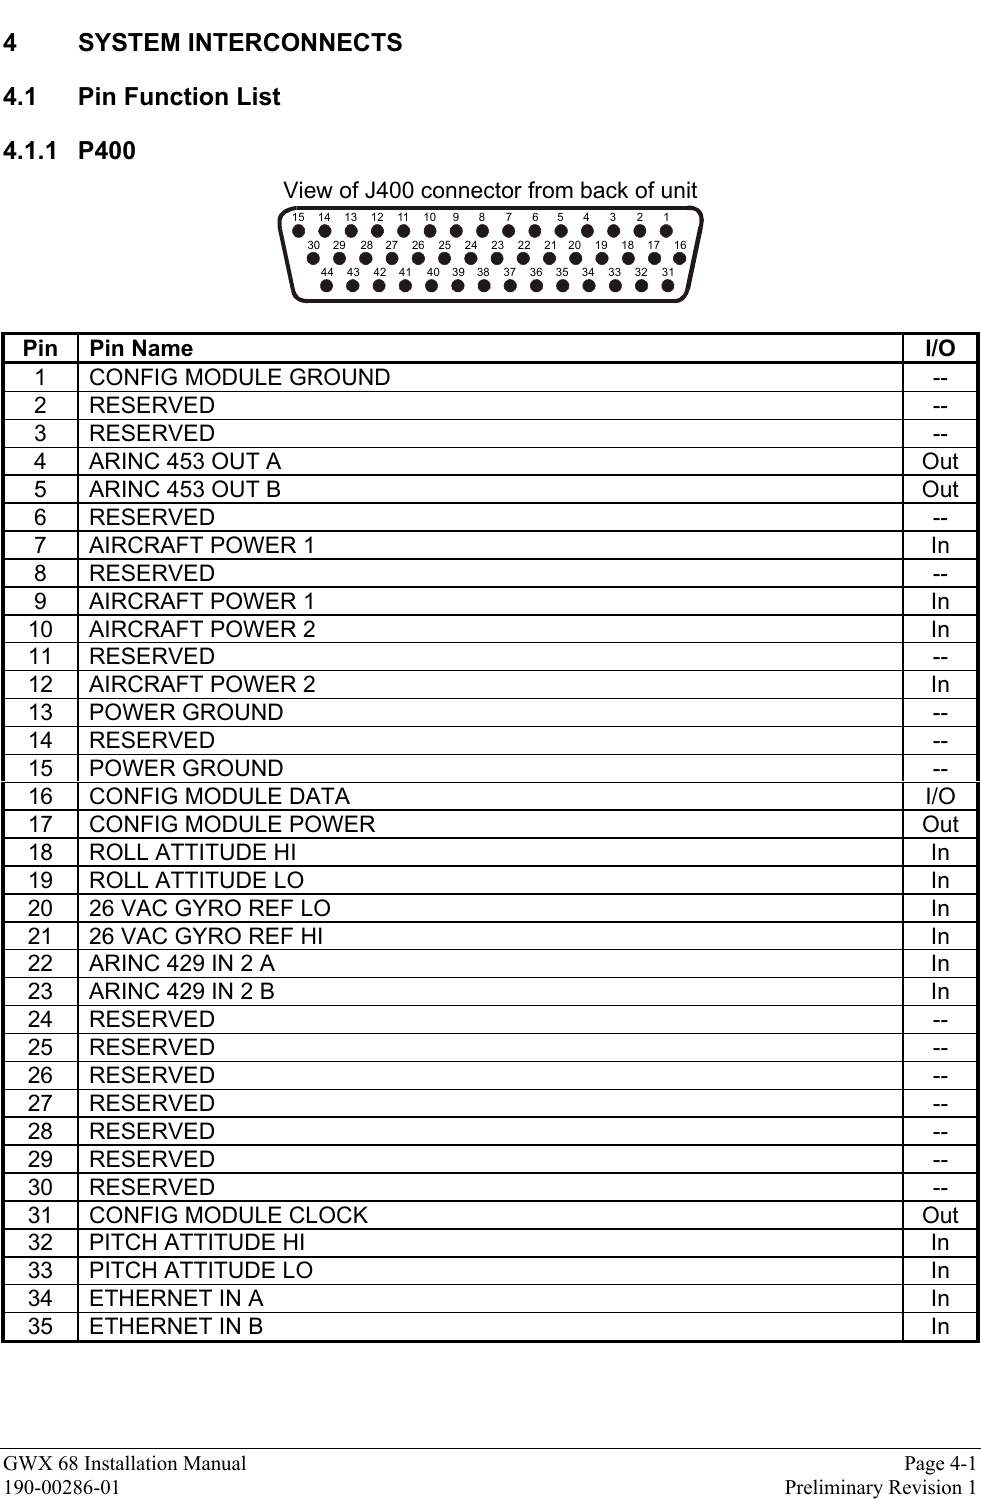 GWX 68 Installation Manual Page 4-1190-00286-01 Preliminary Revision 14 SYSTEM INTERCONNECTS4.1  Pin Function List4.1.1 P400View of J400 connector from back of unit1234567891011121314151617181920212223242526272829303132333435363738394041424344Pin Pin Name I/O1 CONFIG MODULE GROUND --2 RESERVED --3 RESERVED --4 ARINC 453 OUT A Out5 ARINC 453 OUT B Out6 RESERVED --7 AIRCRAFT POWER 1 In8 RESERVED --9 AIRCRAFT POWER 1 In10 AIRCRAFT POWER 2 In11 RESERVED --12 AIRCRAFT POWER 2 In13 POWER GROUND --14 RESERVED --15 POWER GROUND --16 CONFIG MODULE DATA I/O17 CONFIG MODULE POWER Out18 ROLL ATTITUDE HI In19 ROLL ATTITUDE LO In20 26 VAC GYRO REF LO In21 26 VAC GYRO REF HI In22 ARINC 429 IN 2 A In23 ARINC 429 IN 2 B In24 RESERVED --25 RESERVED --26 RESERVED --27 RESERVED --28 RESERVED --29 RESERVED --30 RESERVED --31 CONFIG MODULE CLOCK Out32 PITCH ATTITUDE HI In33 PITCH ATTITUDE LO In34 ETHERNET IN A In35 ETHERNET IN B In